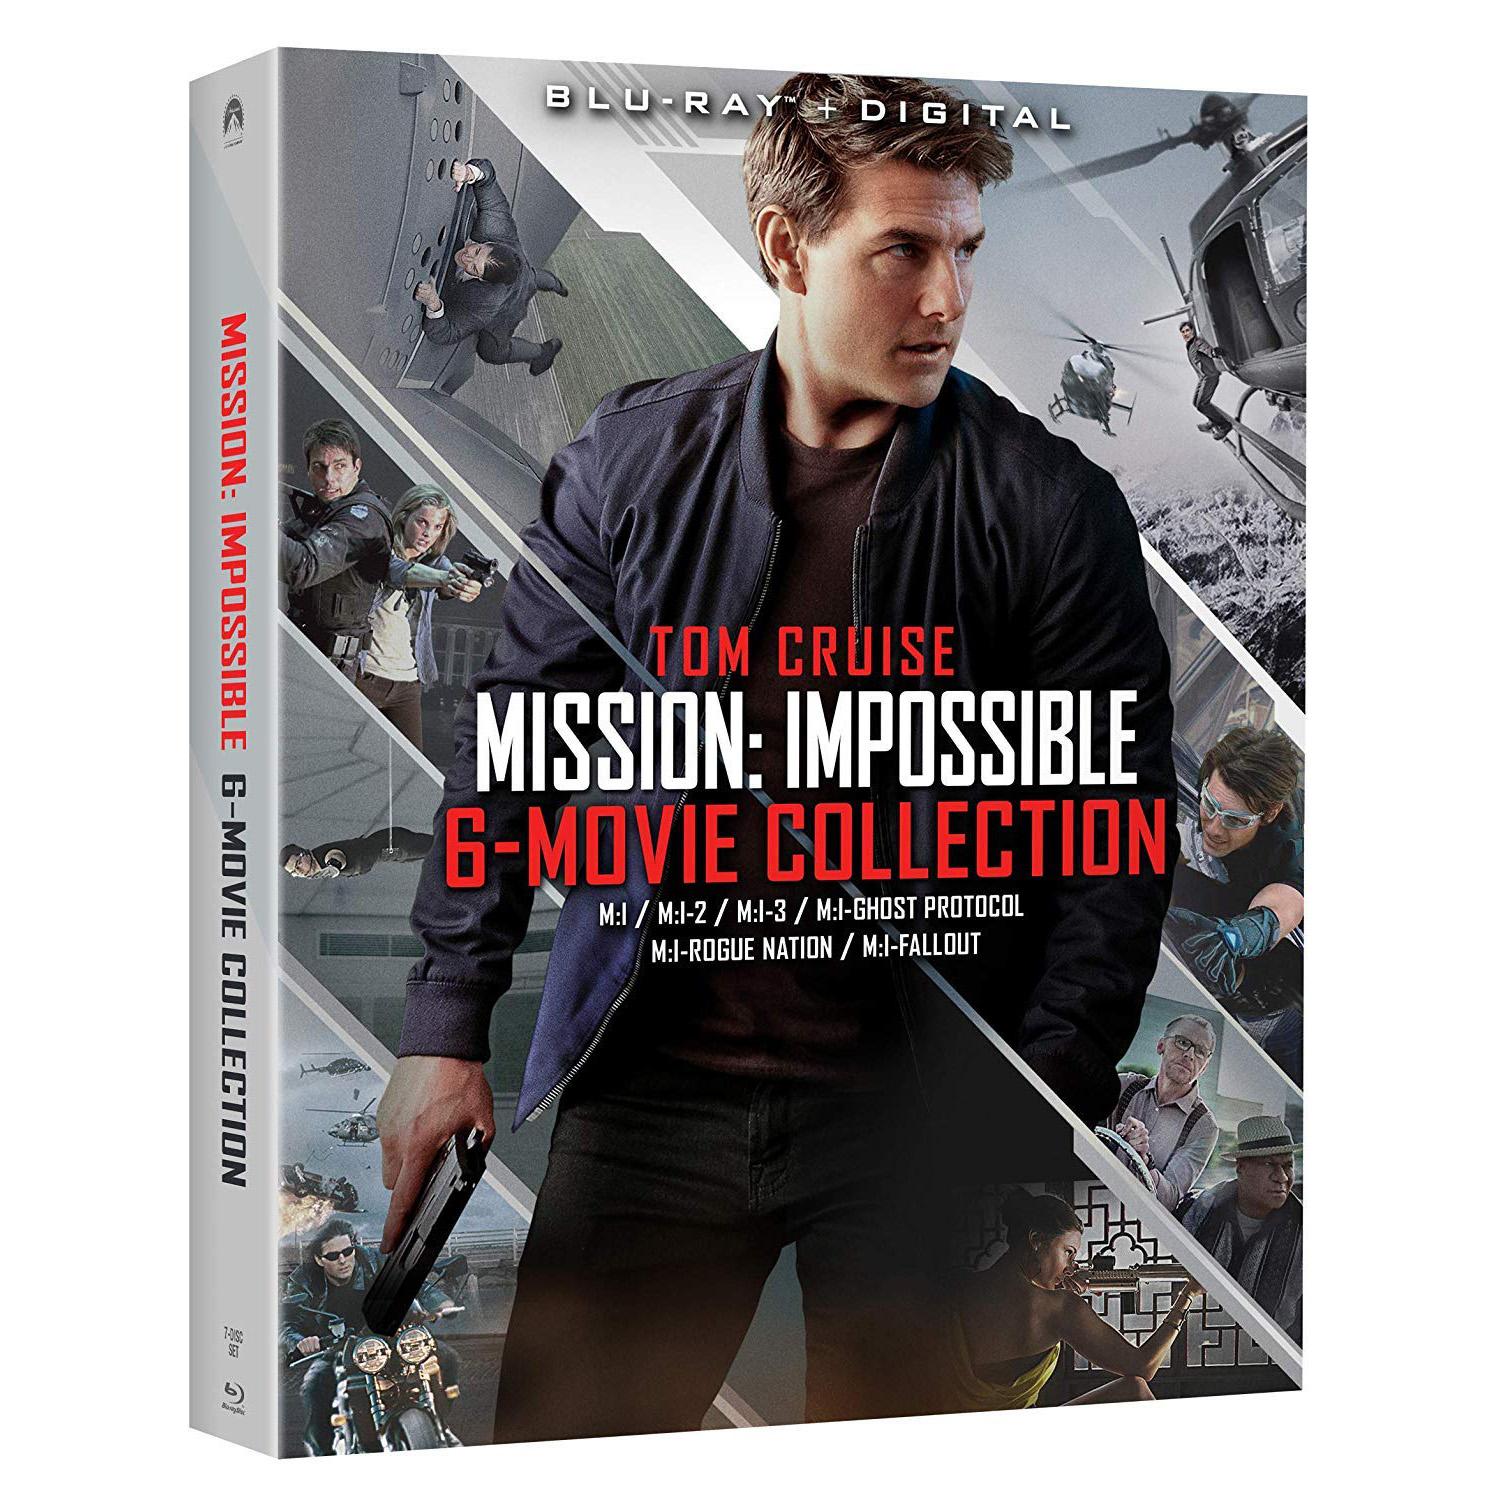 Mission Impossible 6-Film Collection Blu-ray for $15